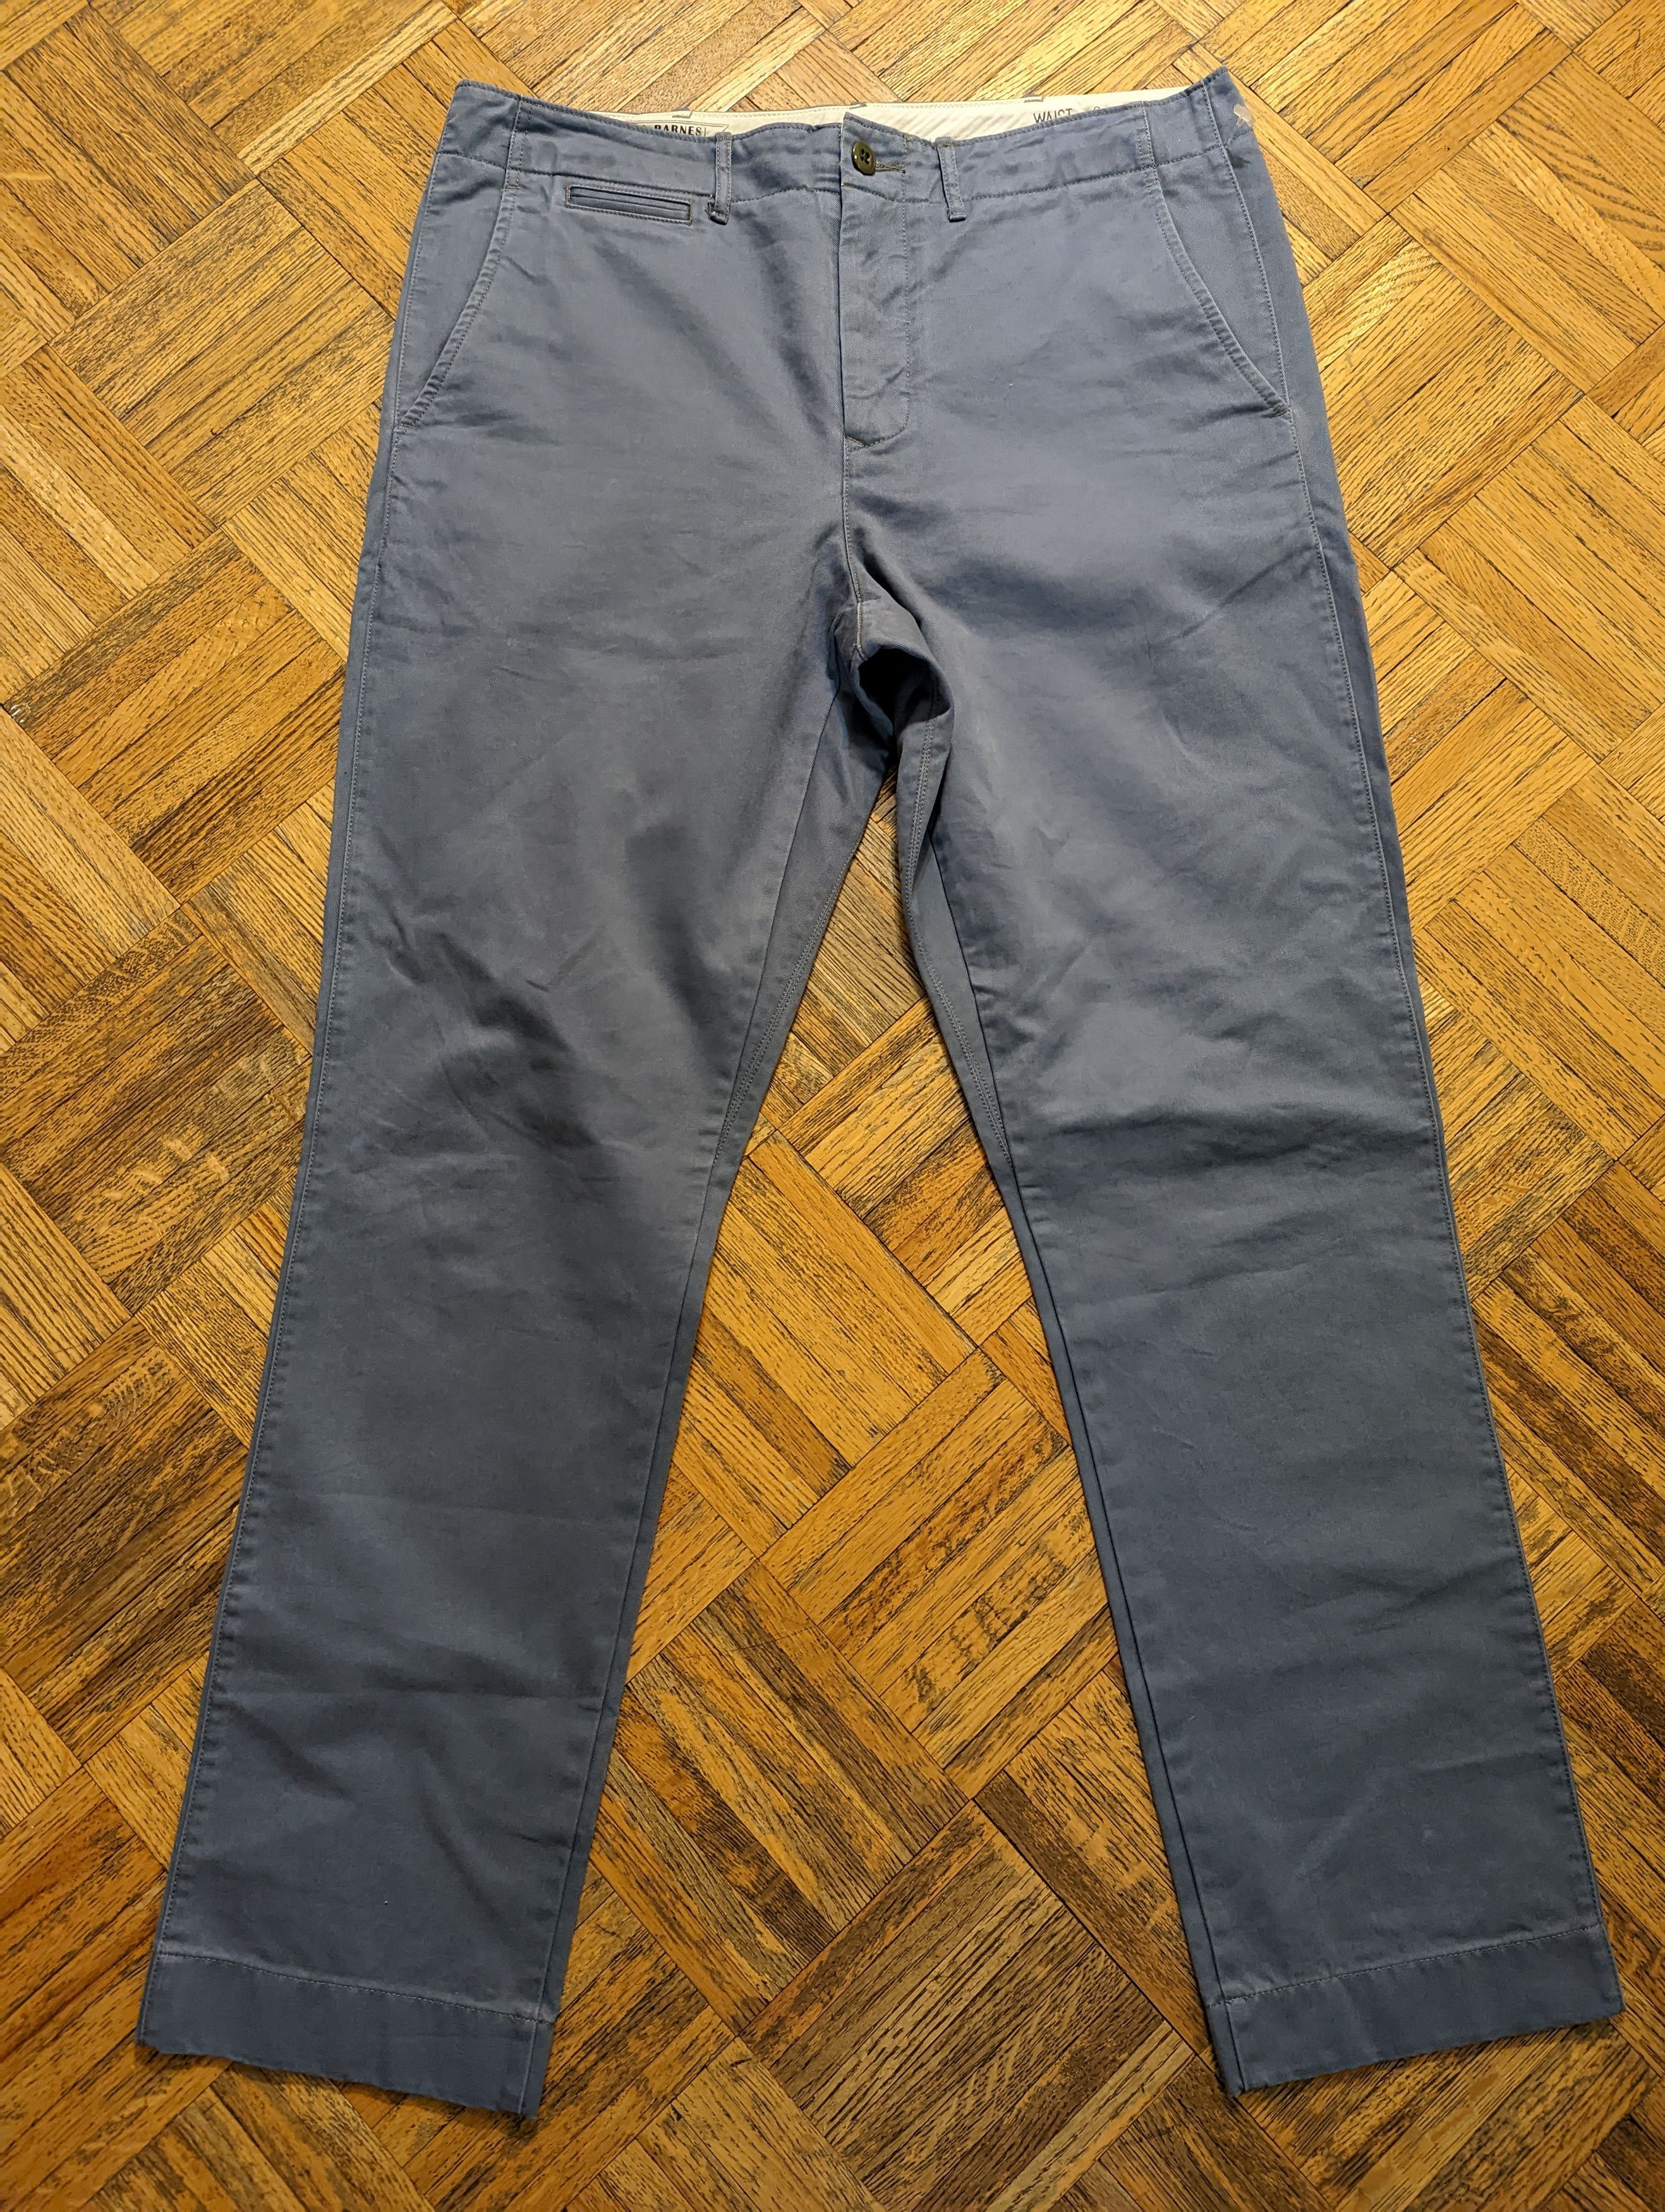 Wallace & Barnes Officer's Chinos | Grailed